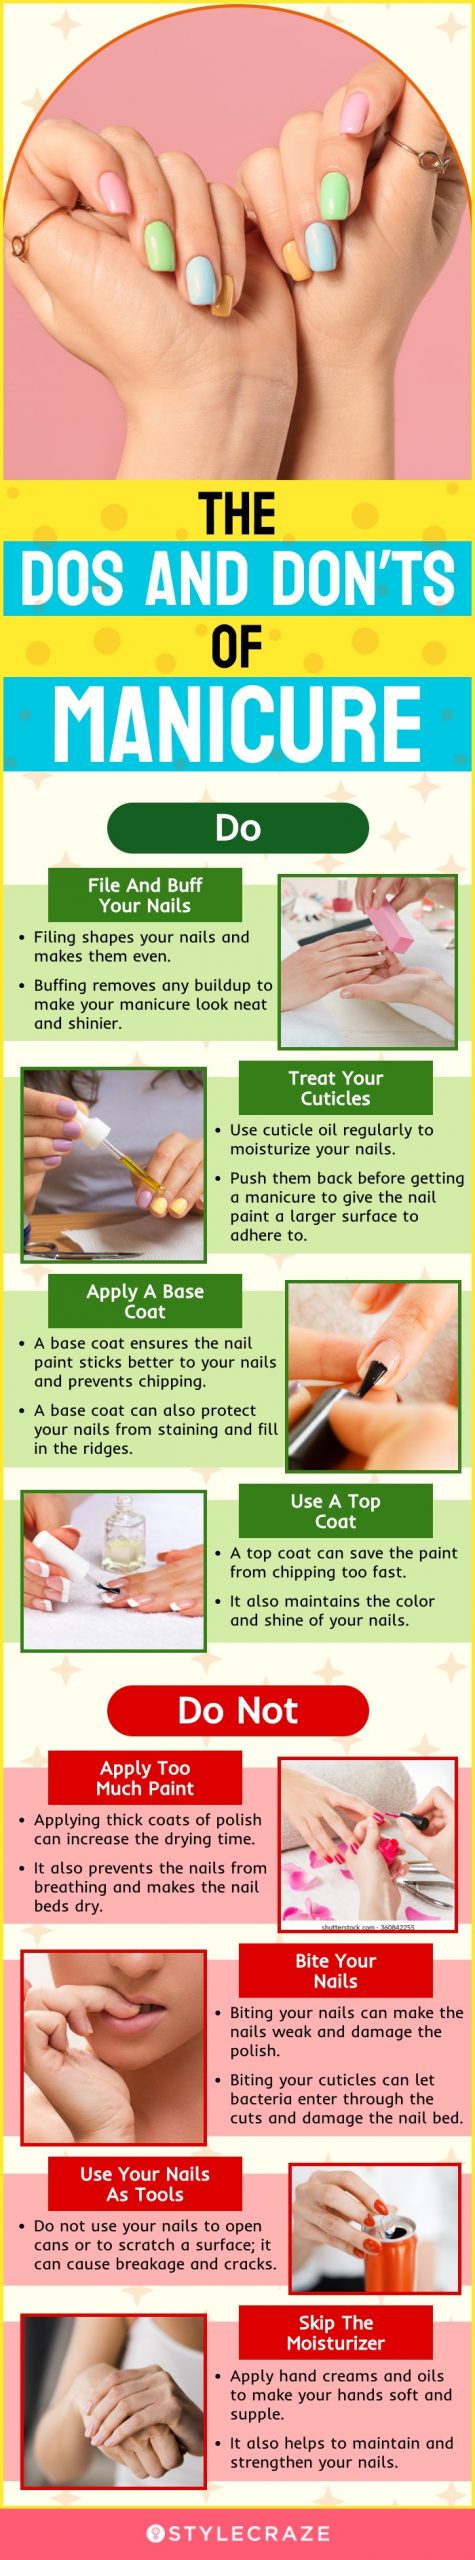 The DOs and DON’Ts Of Manicure (infographic)